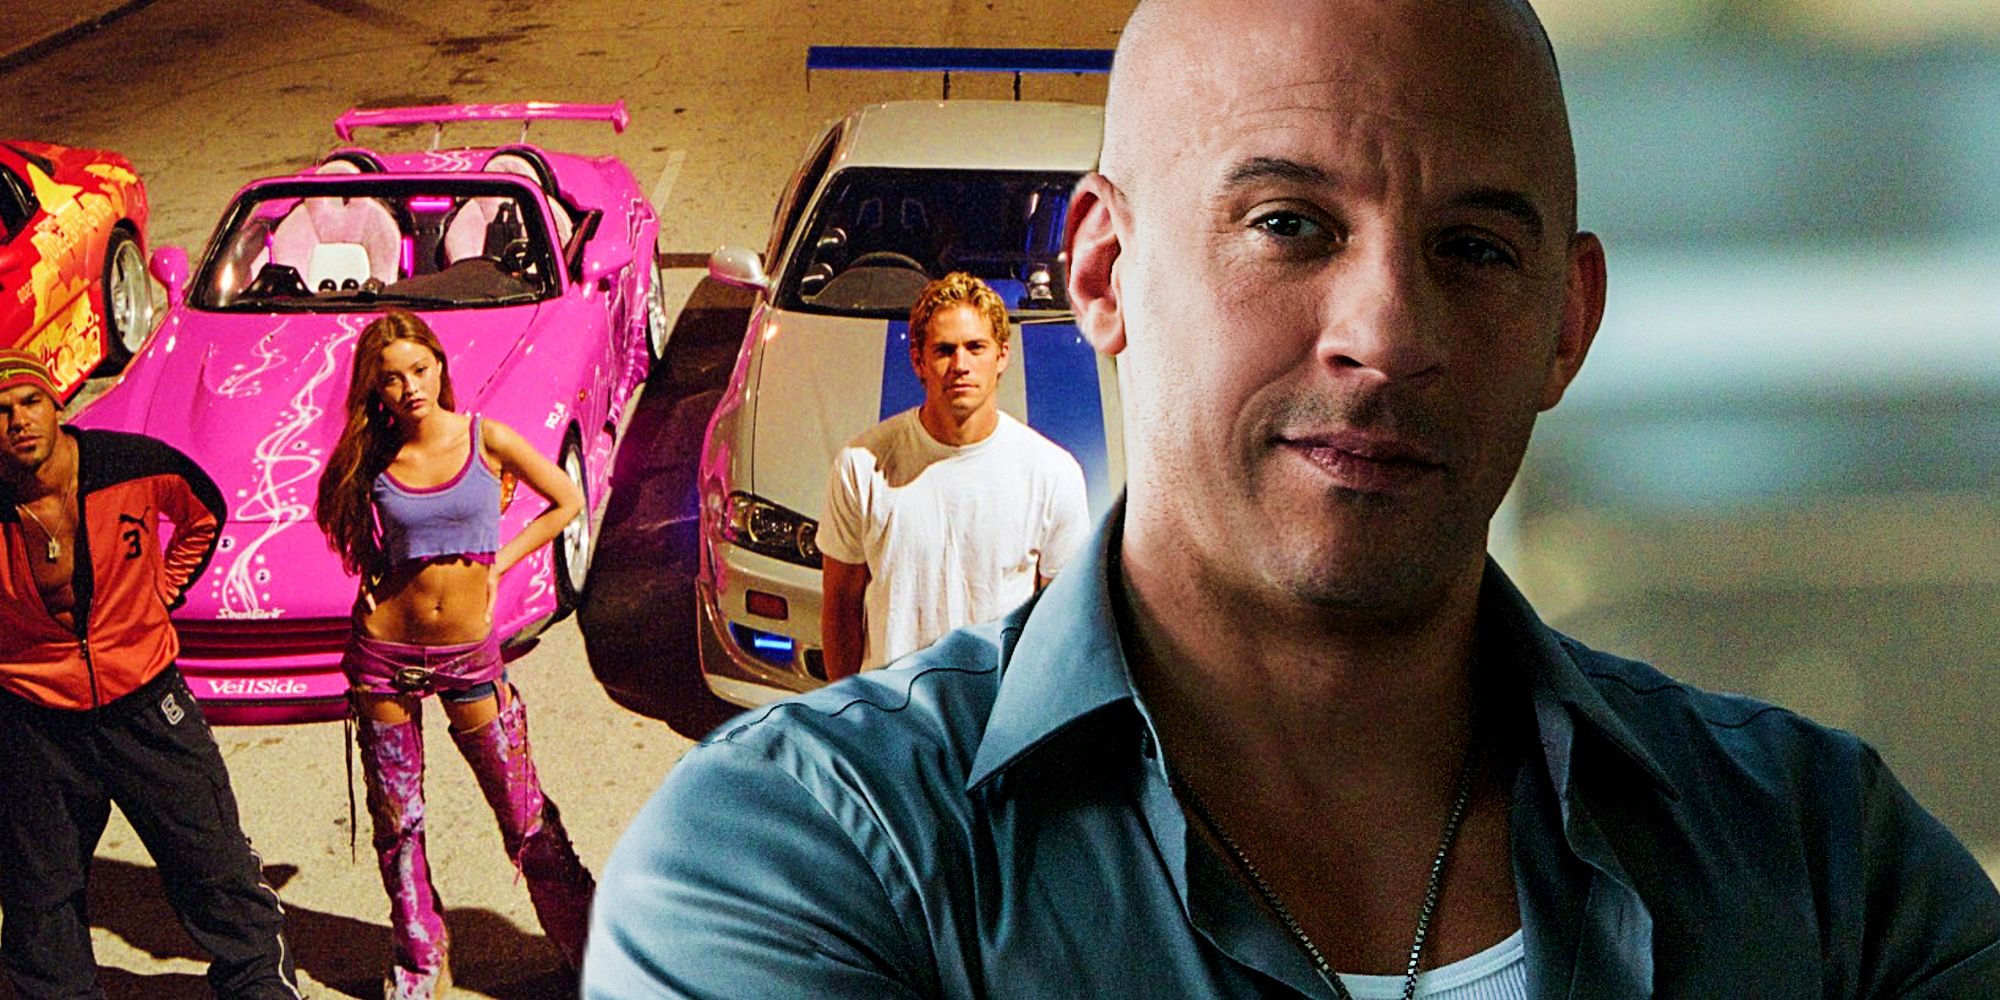 The cast of 2 Fast 2 Furious and Vin Diesel as Toretto